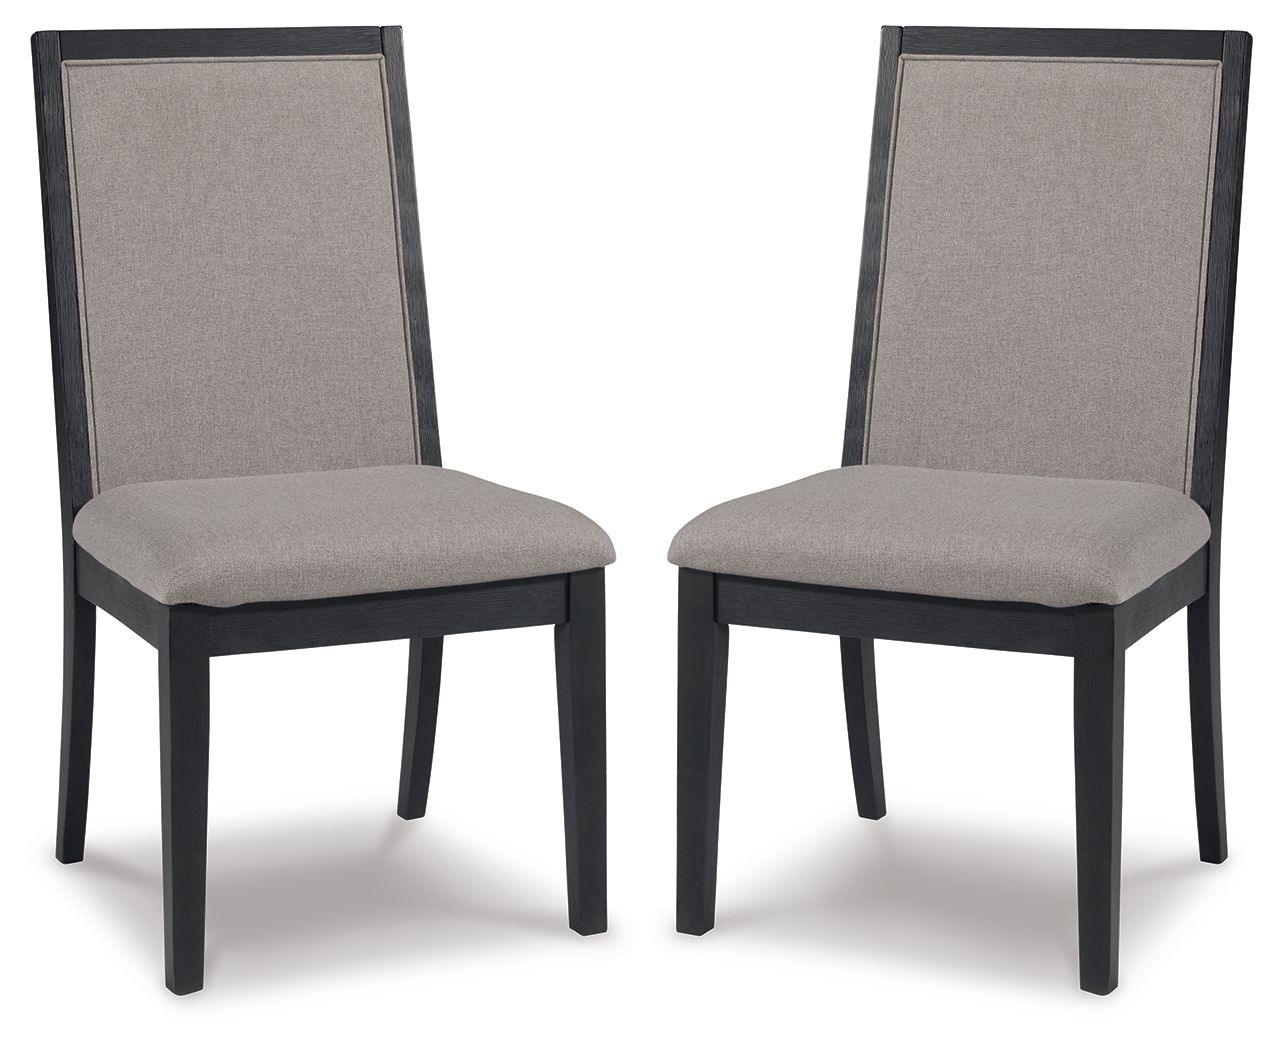 Signature Design by Ashley® - Foyland - Light Gray / Black - Dining Uph Side Chair (Set of 2) - 5th Avenue Furniture